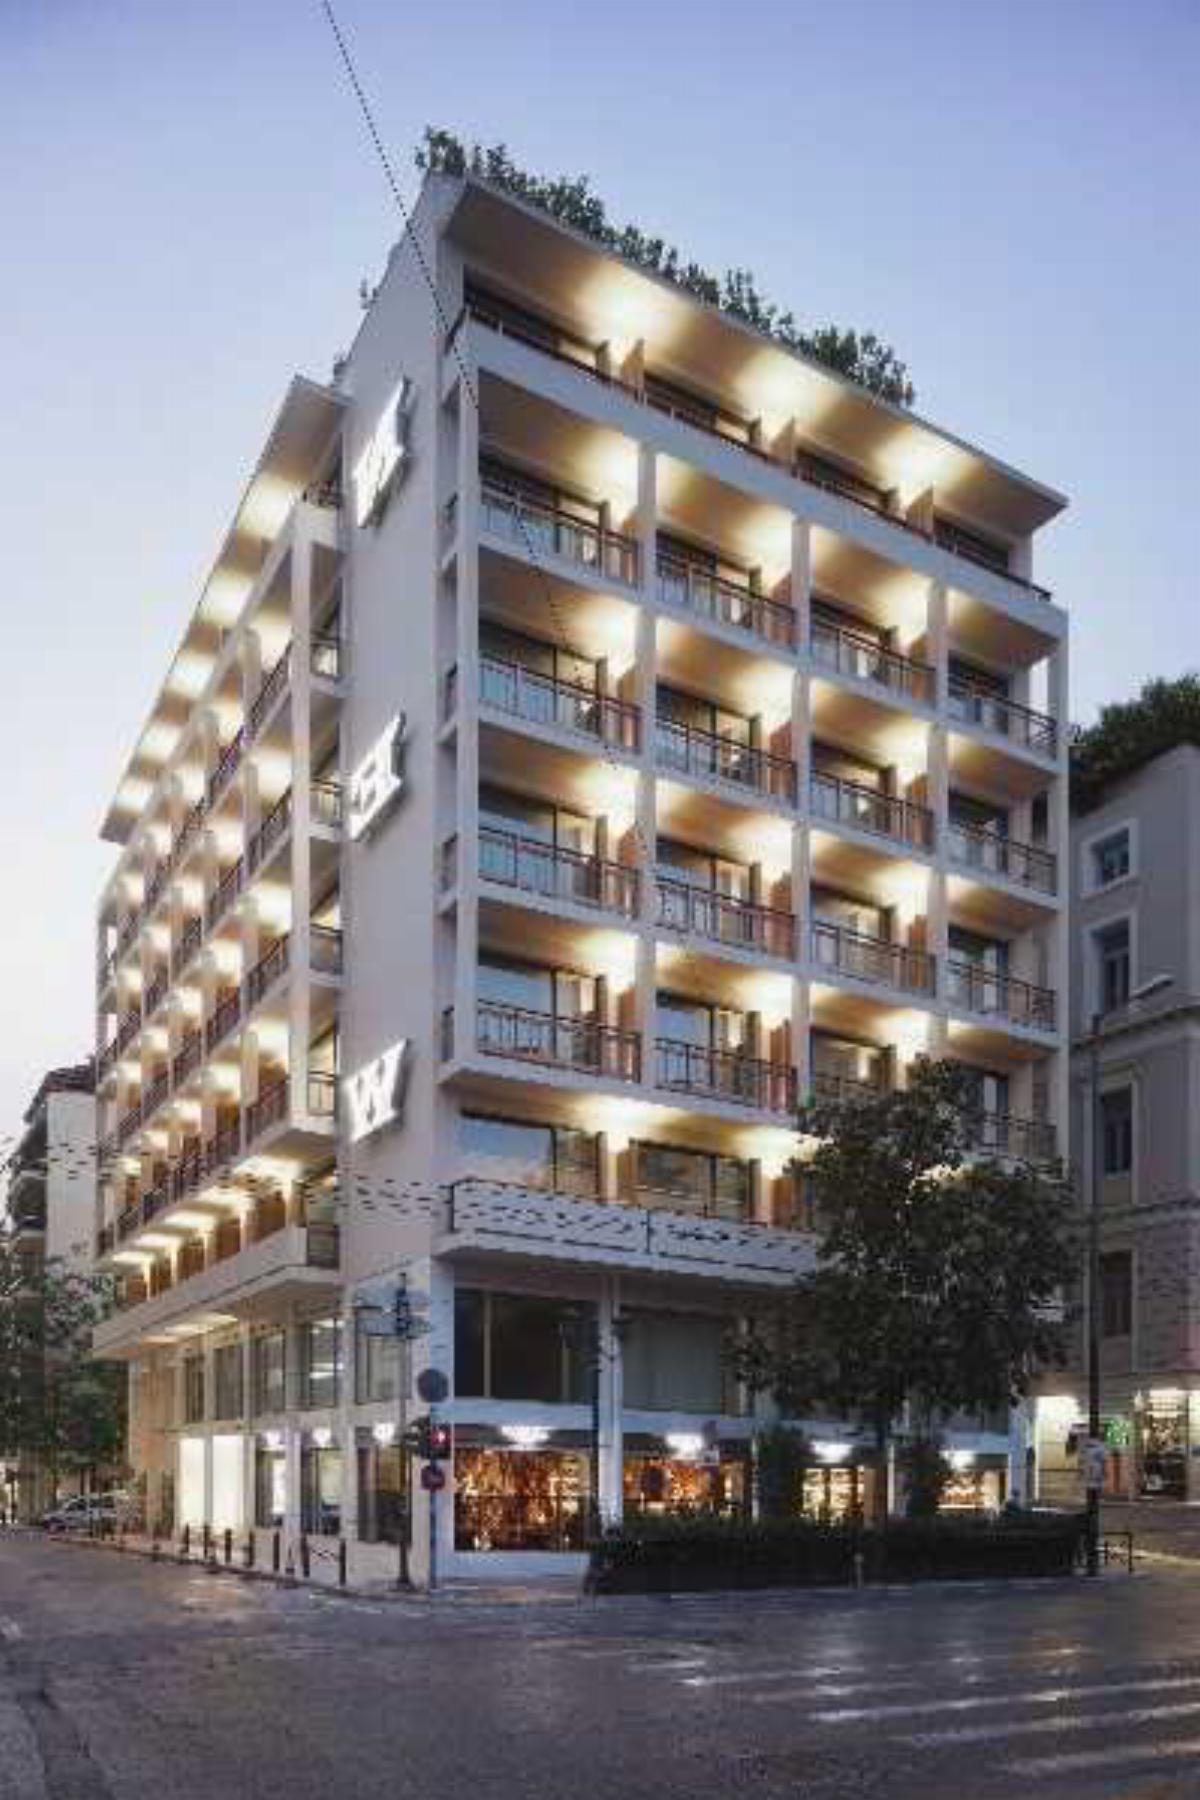 New Hotel Hotel Athens Greece